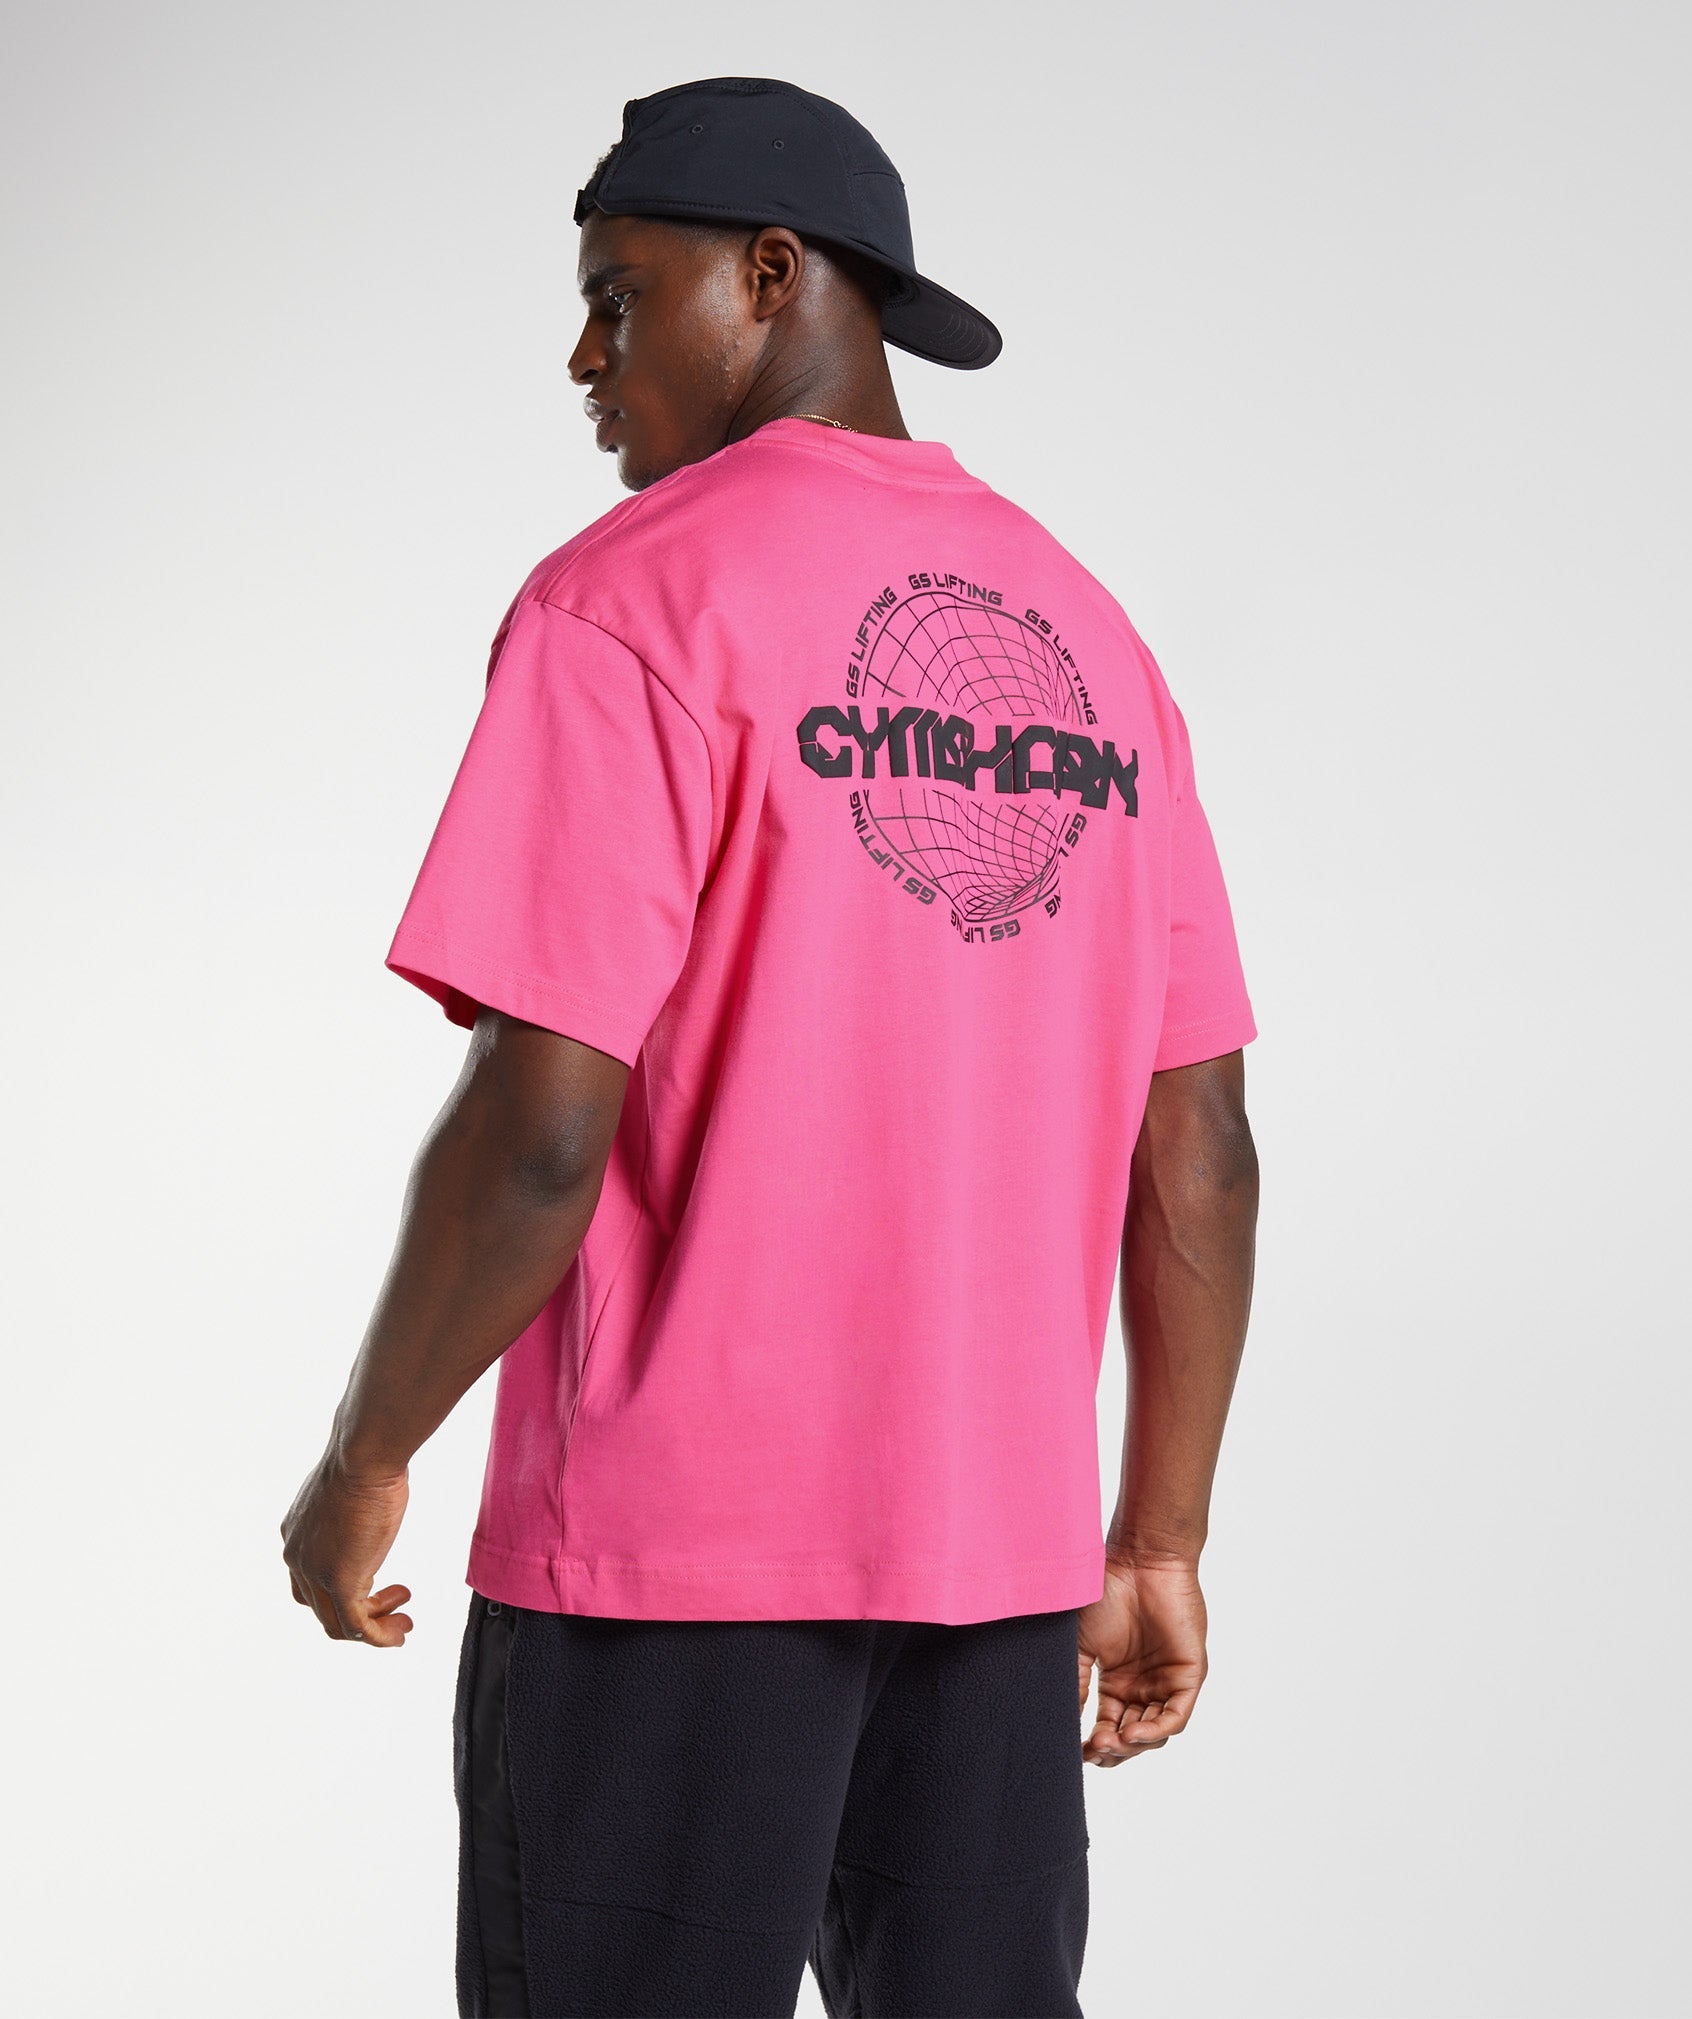 Vibes T-Shirt in Bright Fuchsia - view 2